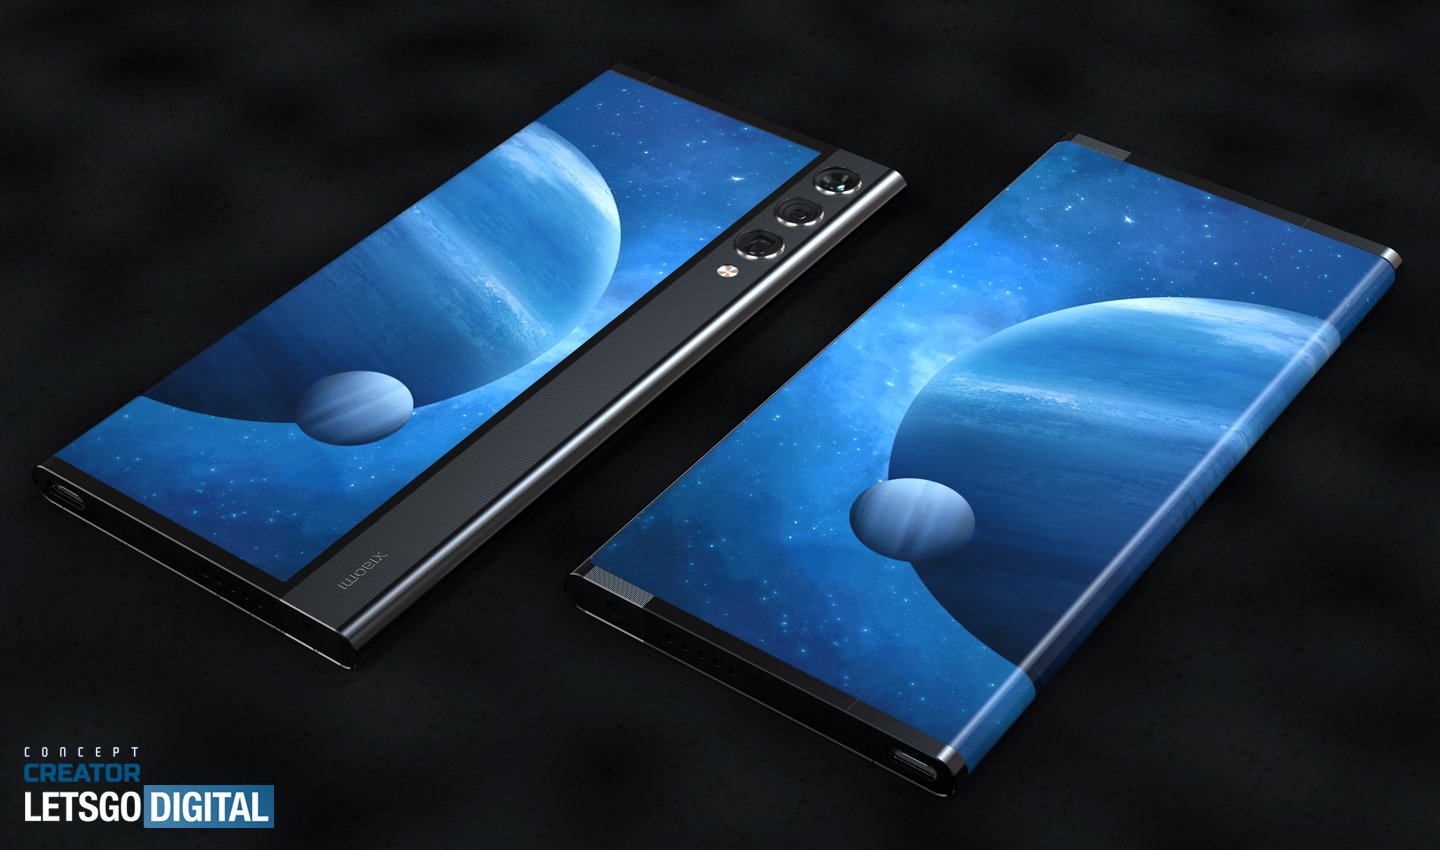 Xiaomi patents a rollable smartphone design with a secondary display